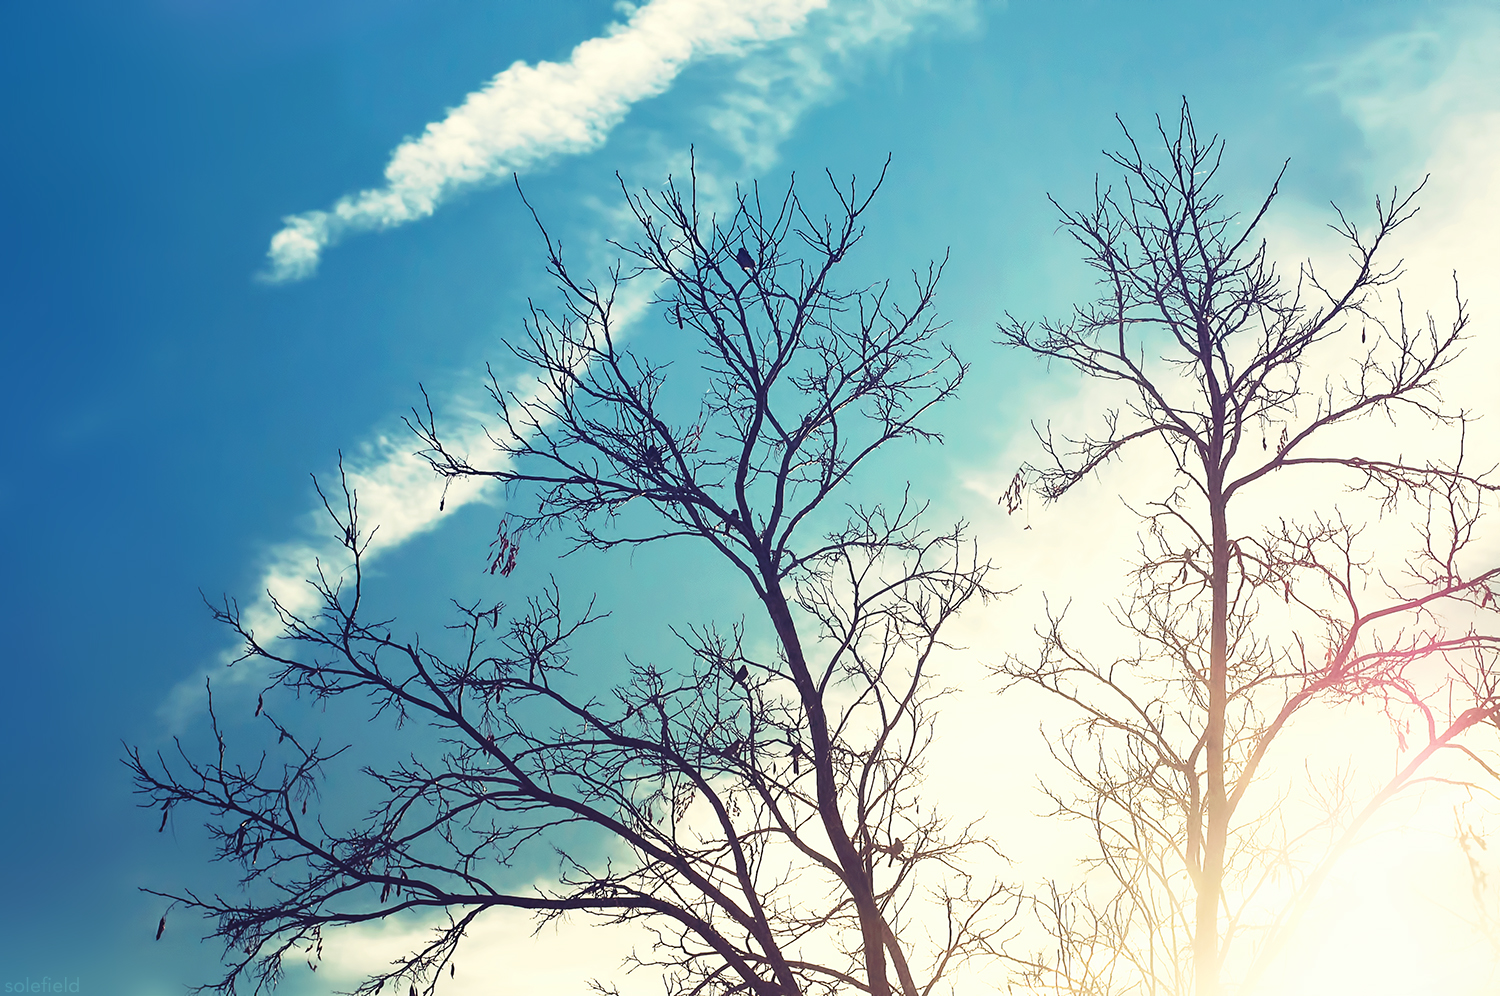 Silhouette of bare tree in front of blue sky